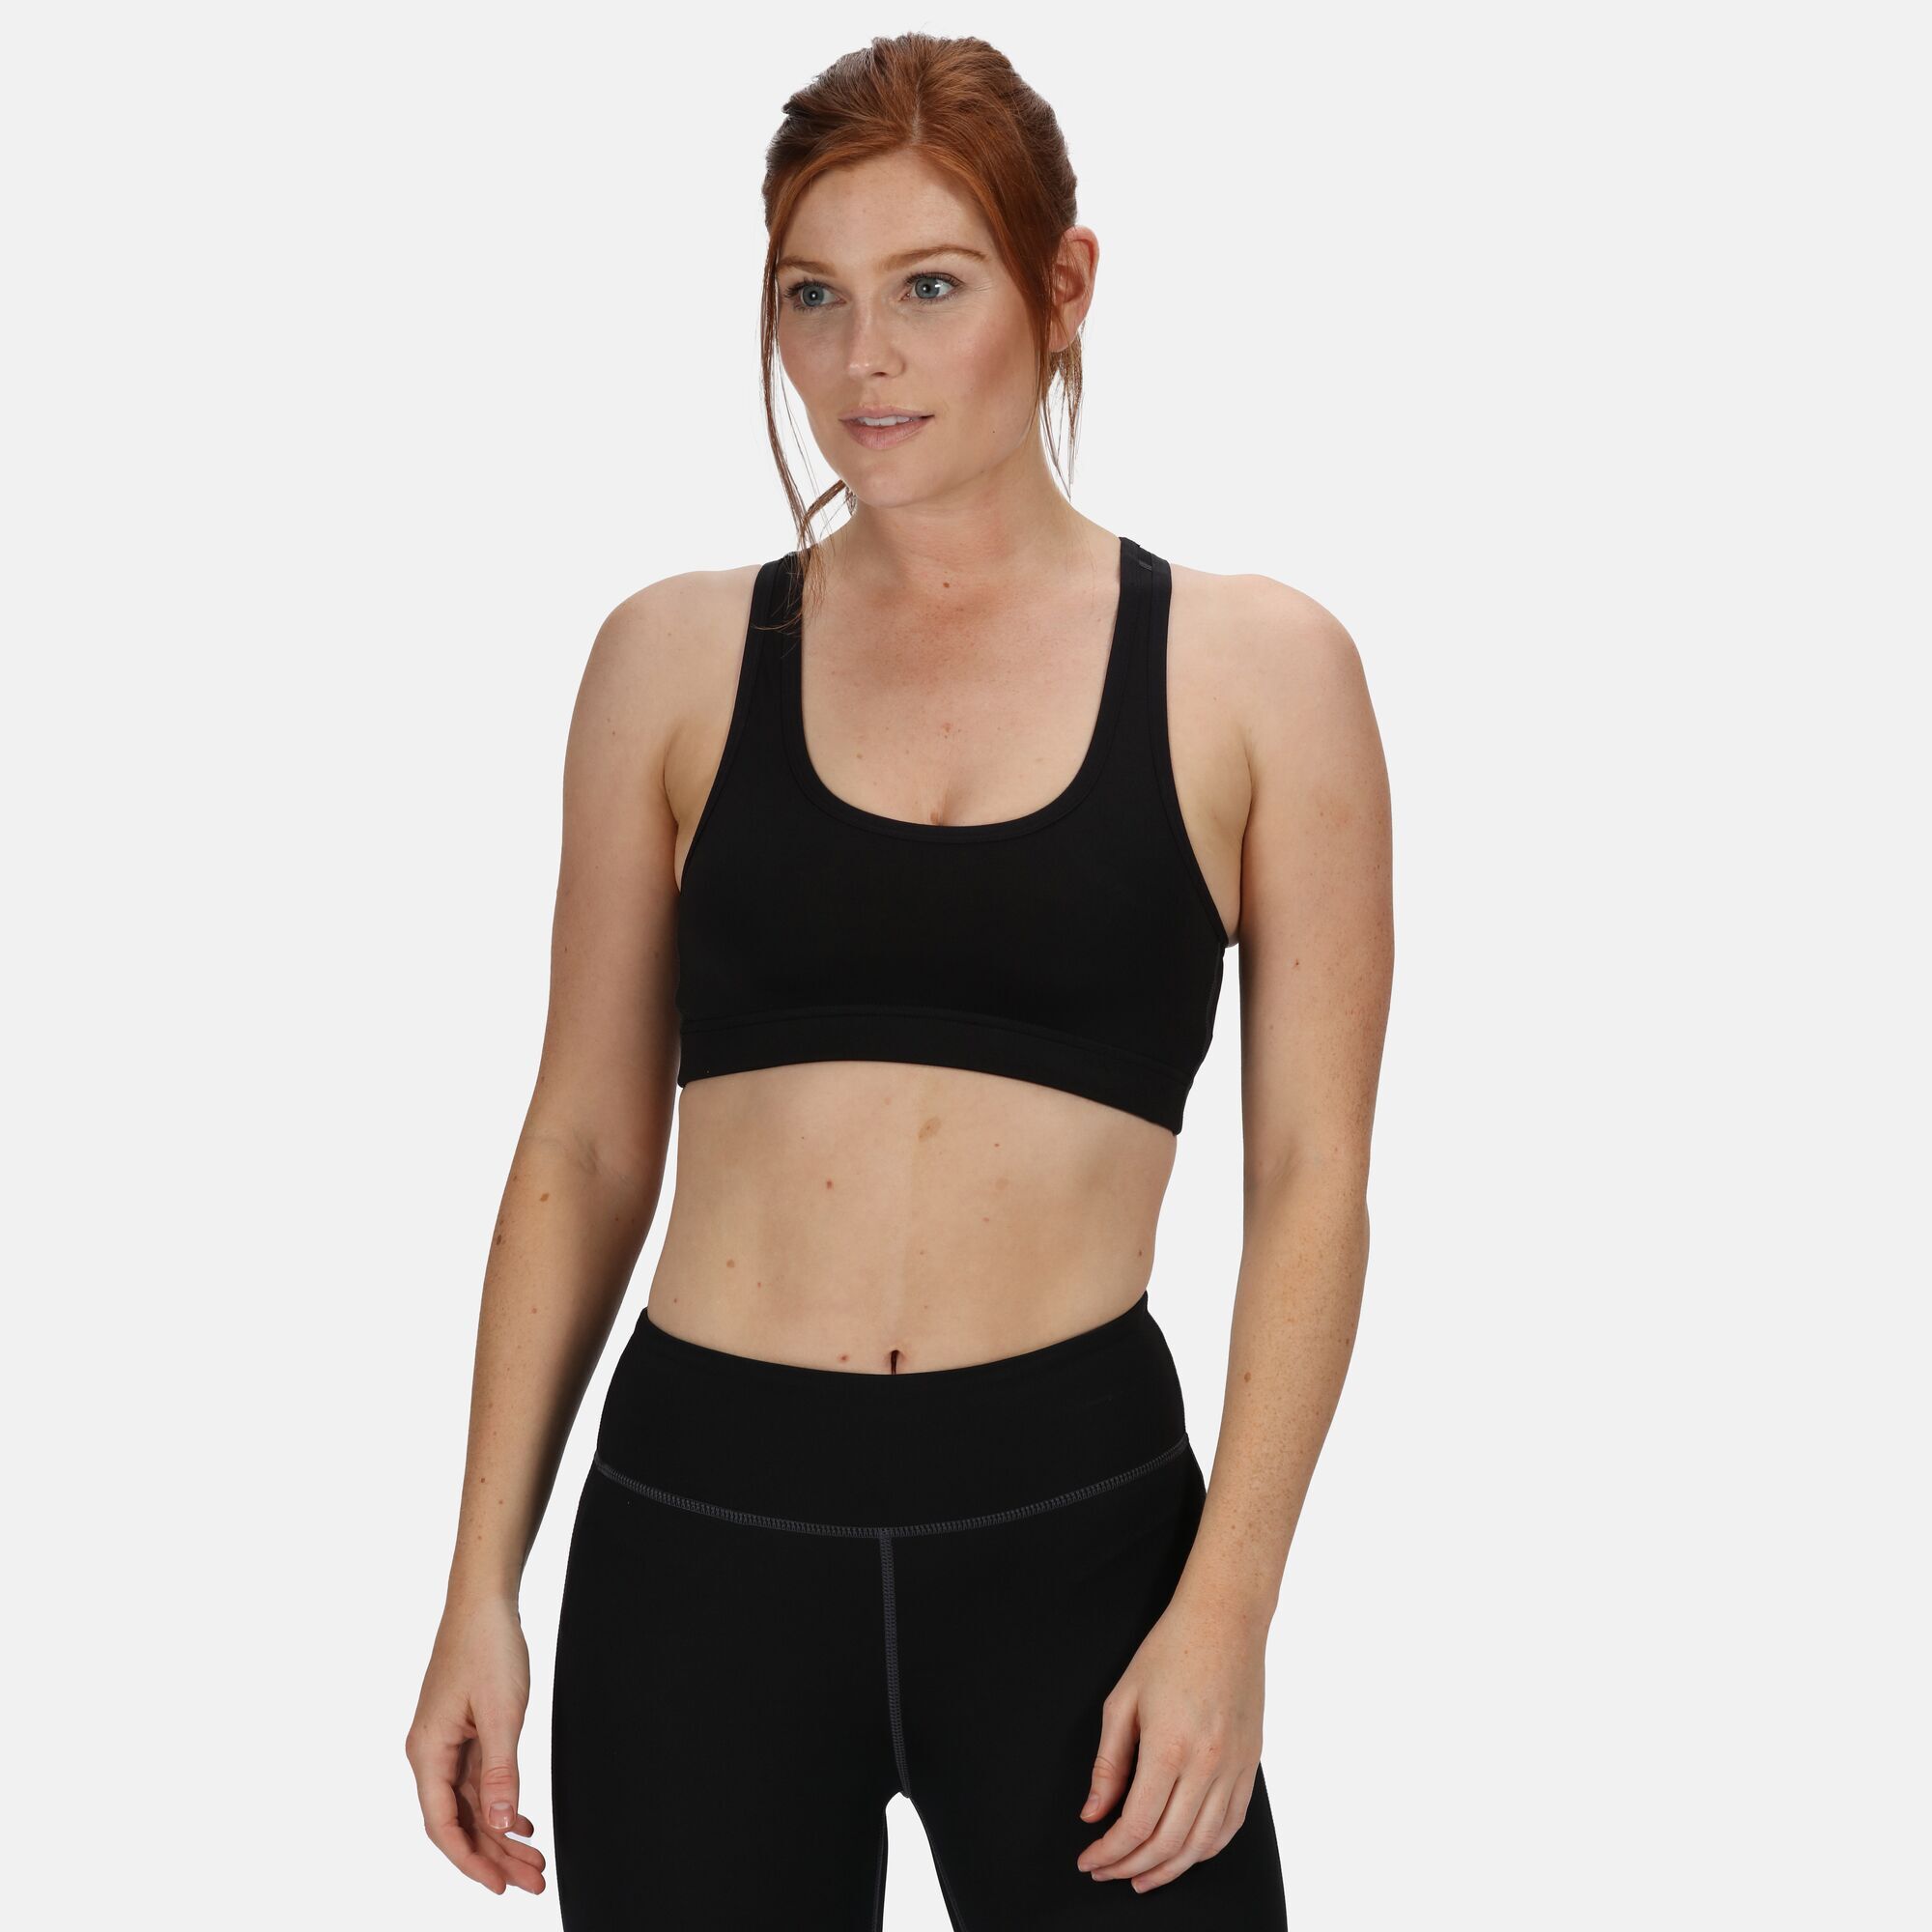 85% polyester, 15% elastane. Good wicking performance. Quick drying. Built-in bra support. Double layer front panel for complete support and comfort.